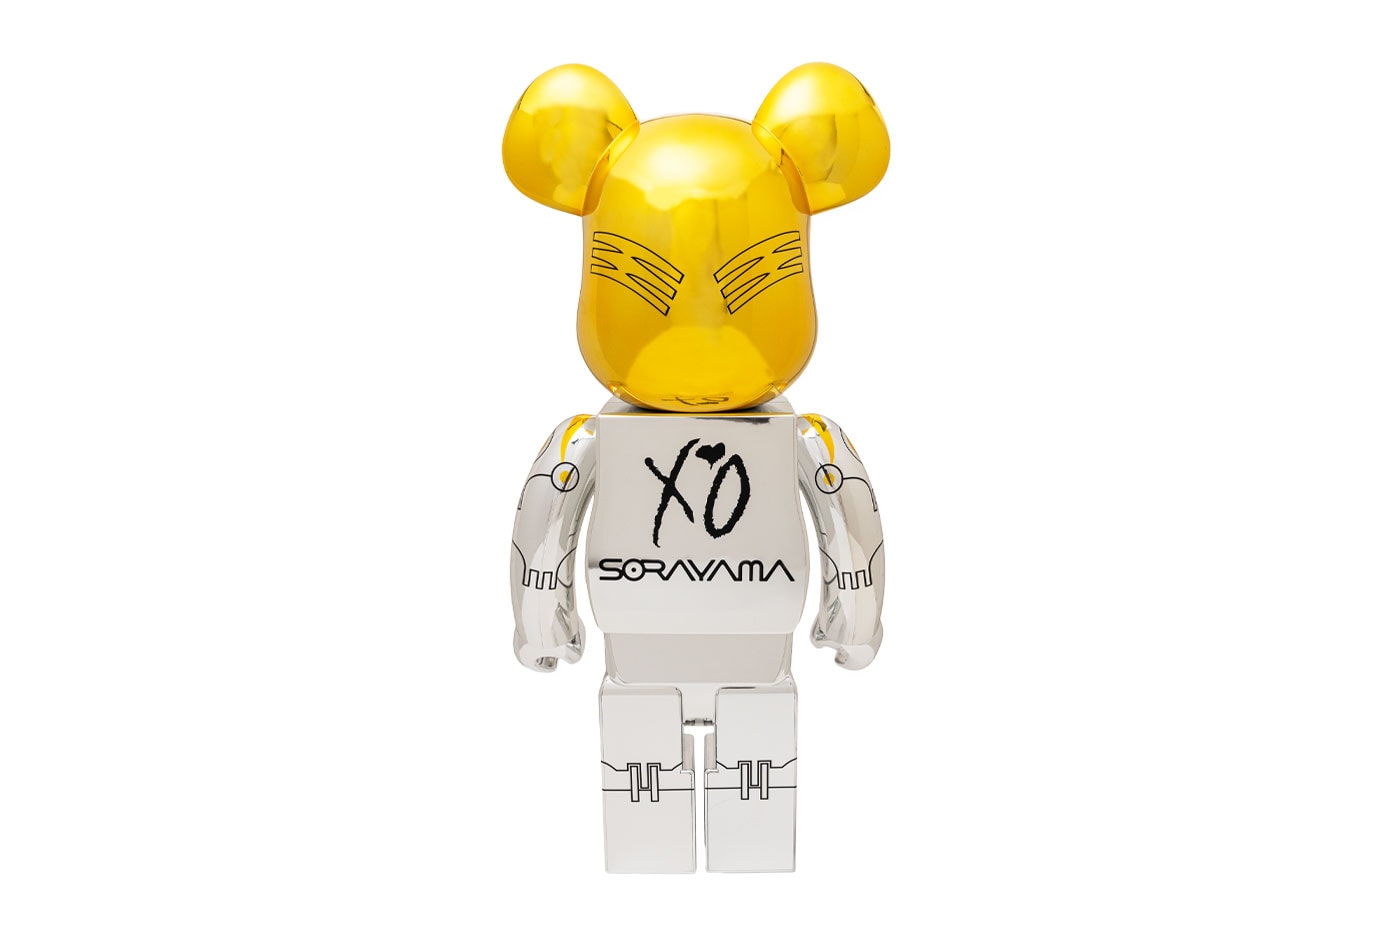 The Weeknd Celebrates 10th Anniversary of 'Echoes of Silence' With Exclusive Sorayama Capsule Collaboration toronto hip hop r&b save your tears blinding lights bearbrick be@rbrick